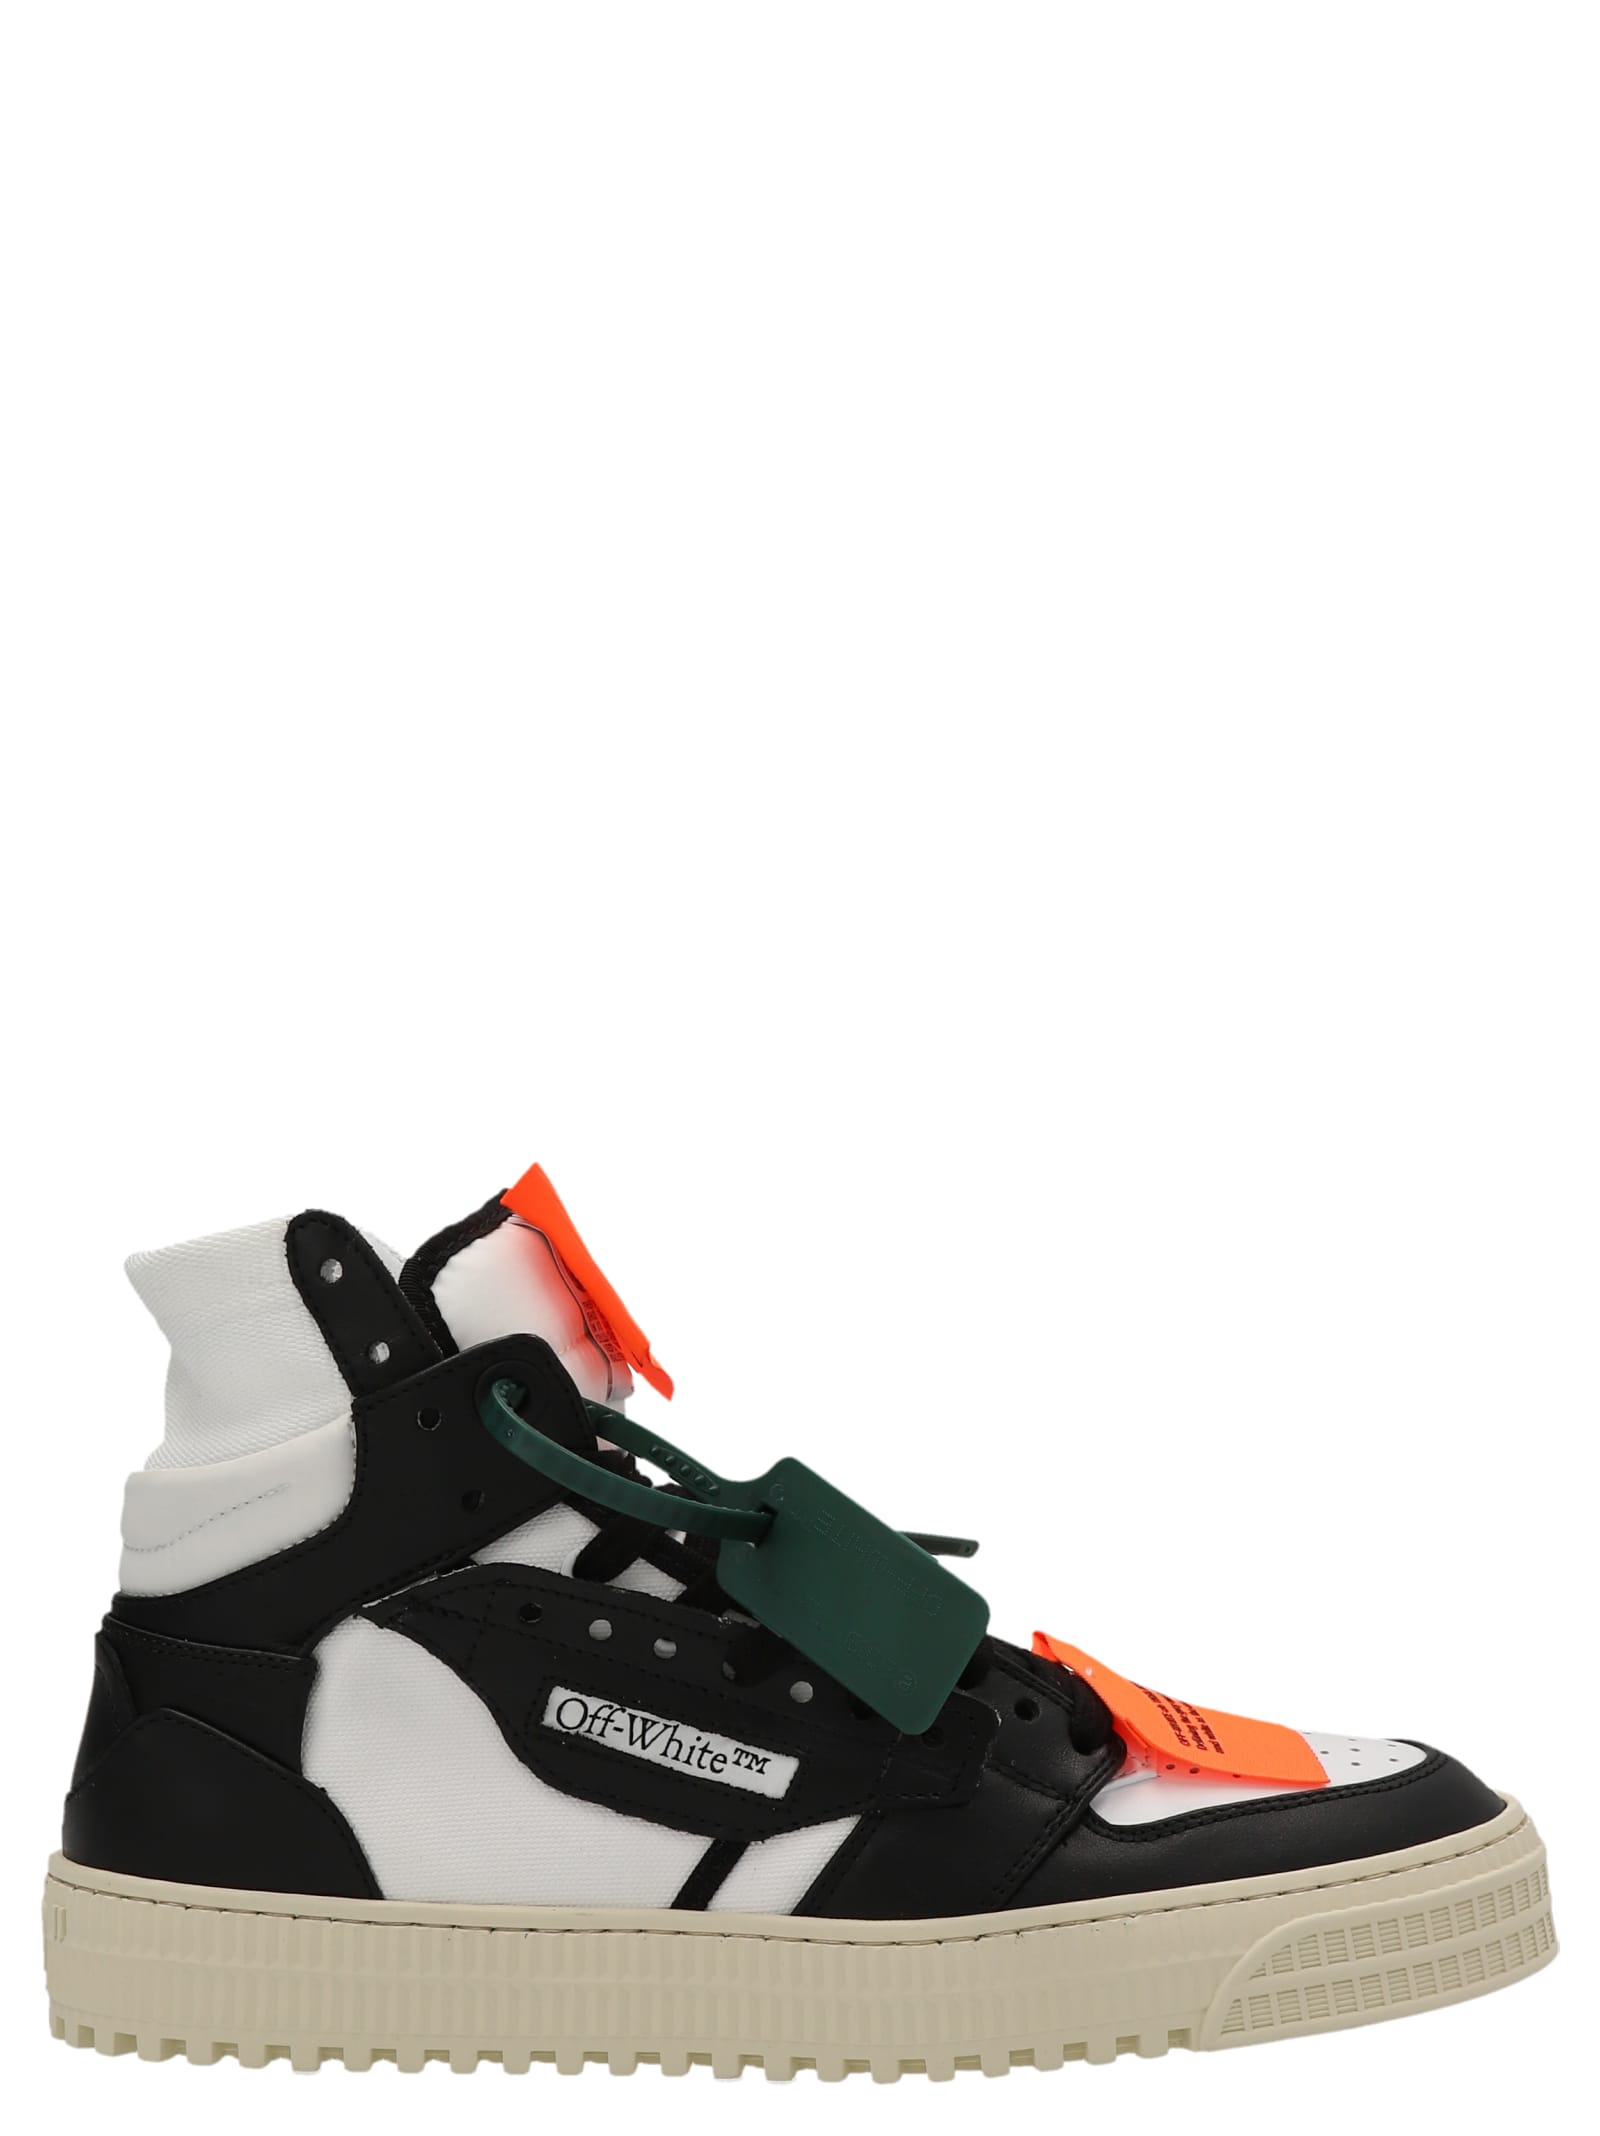 OFF-WHITE 3.0 OFF COURT trainers